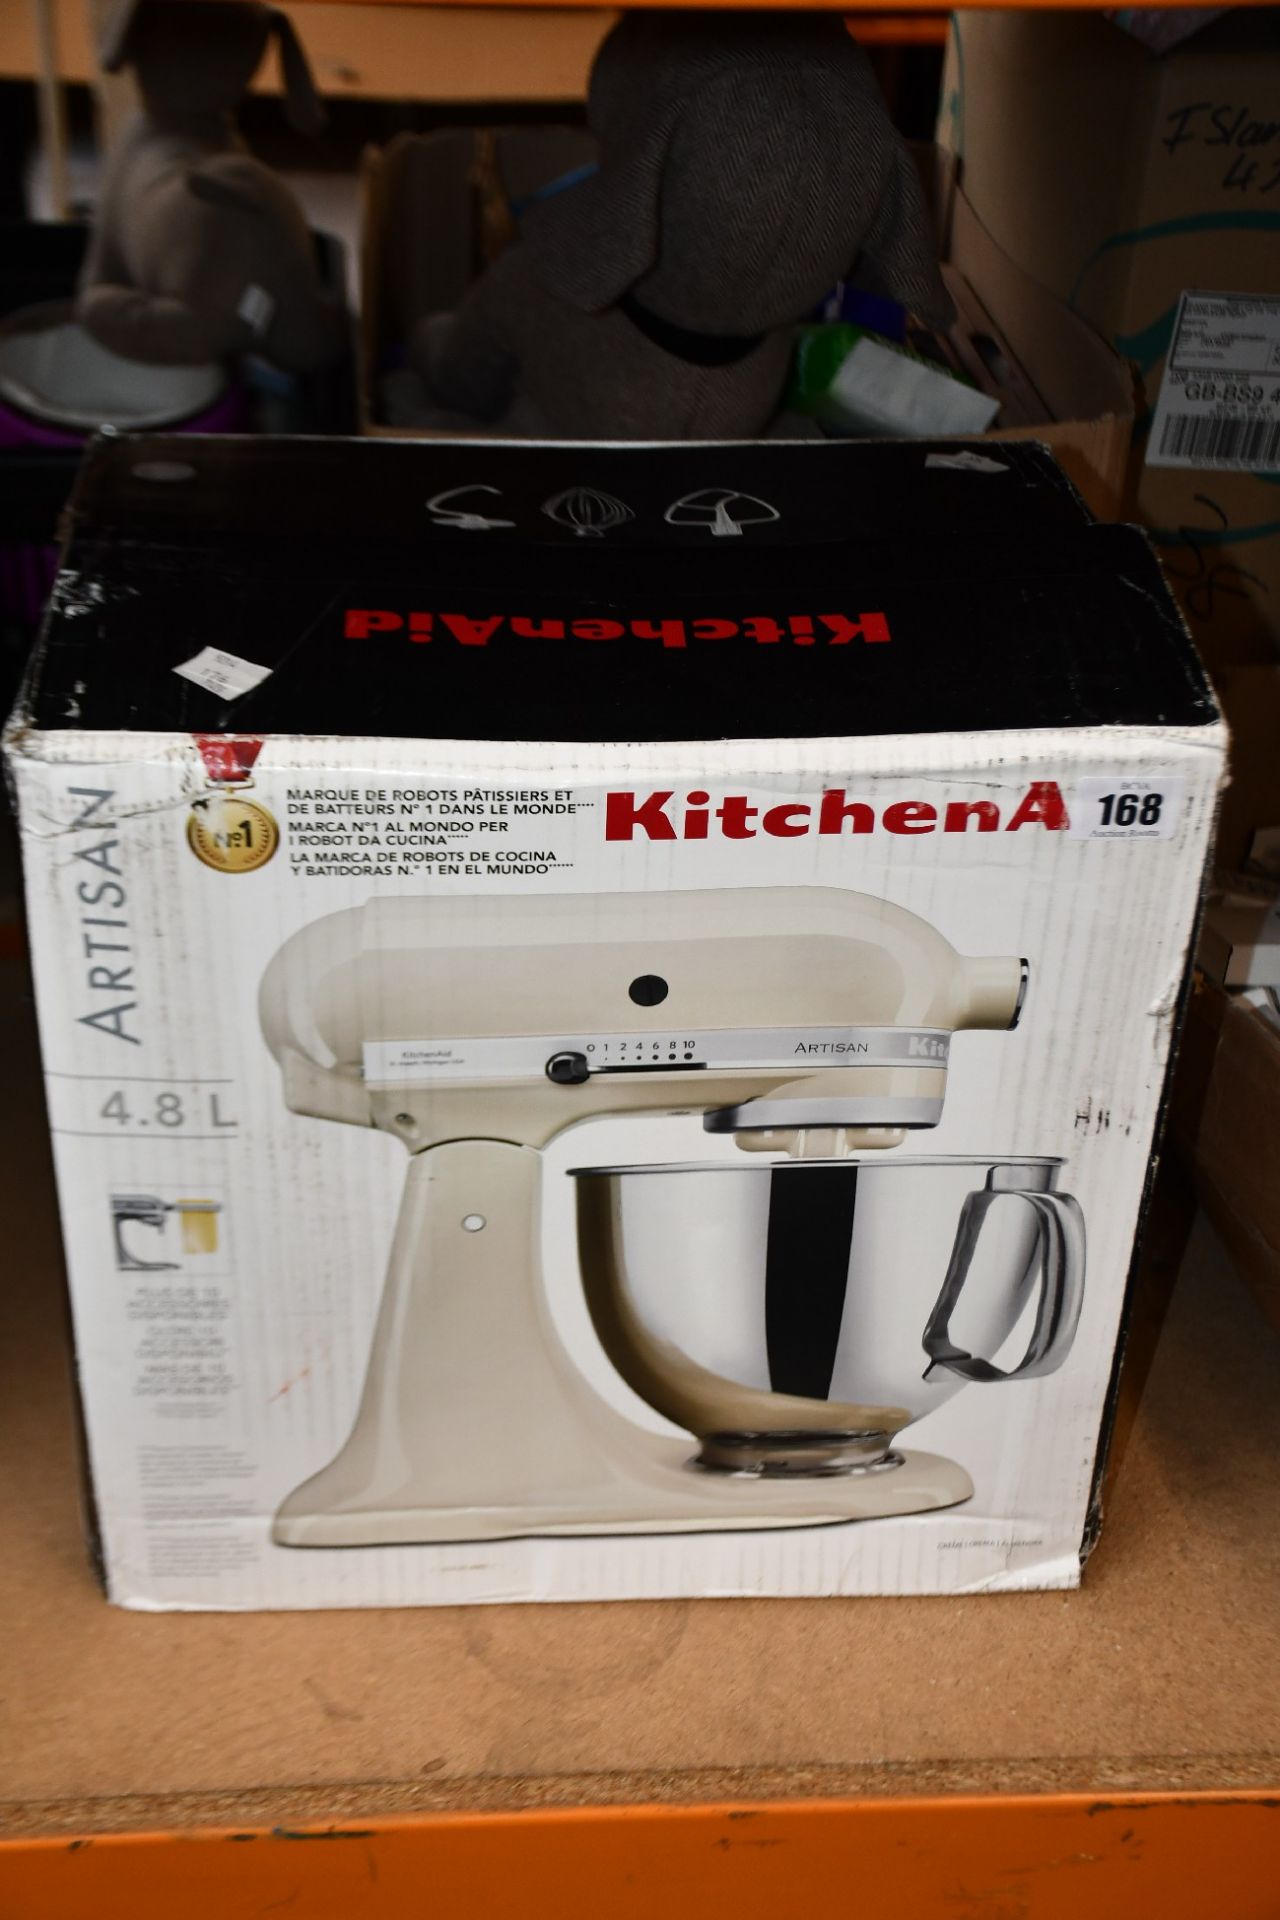 A pre-owned KitchenAid Artisan 4.8L Mixer in Almond Creme (UK Plug) (NOTE: Item is untested, viewing